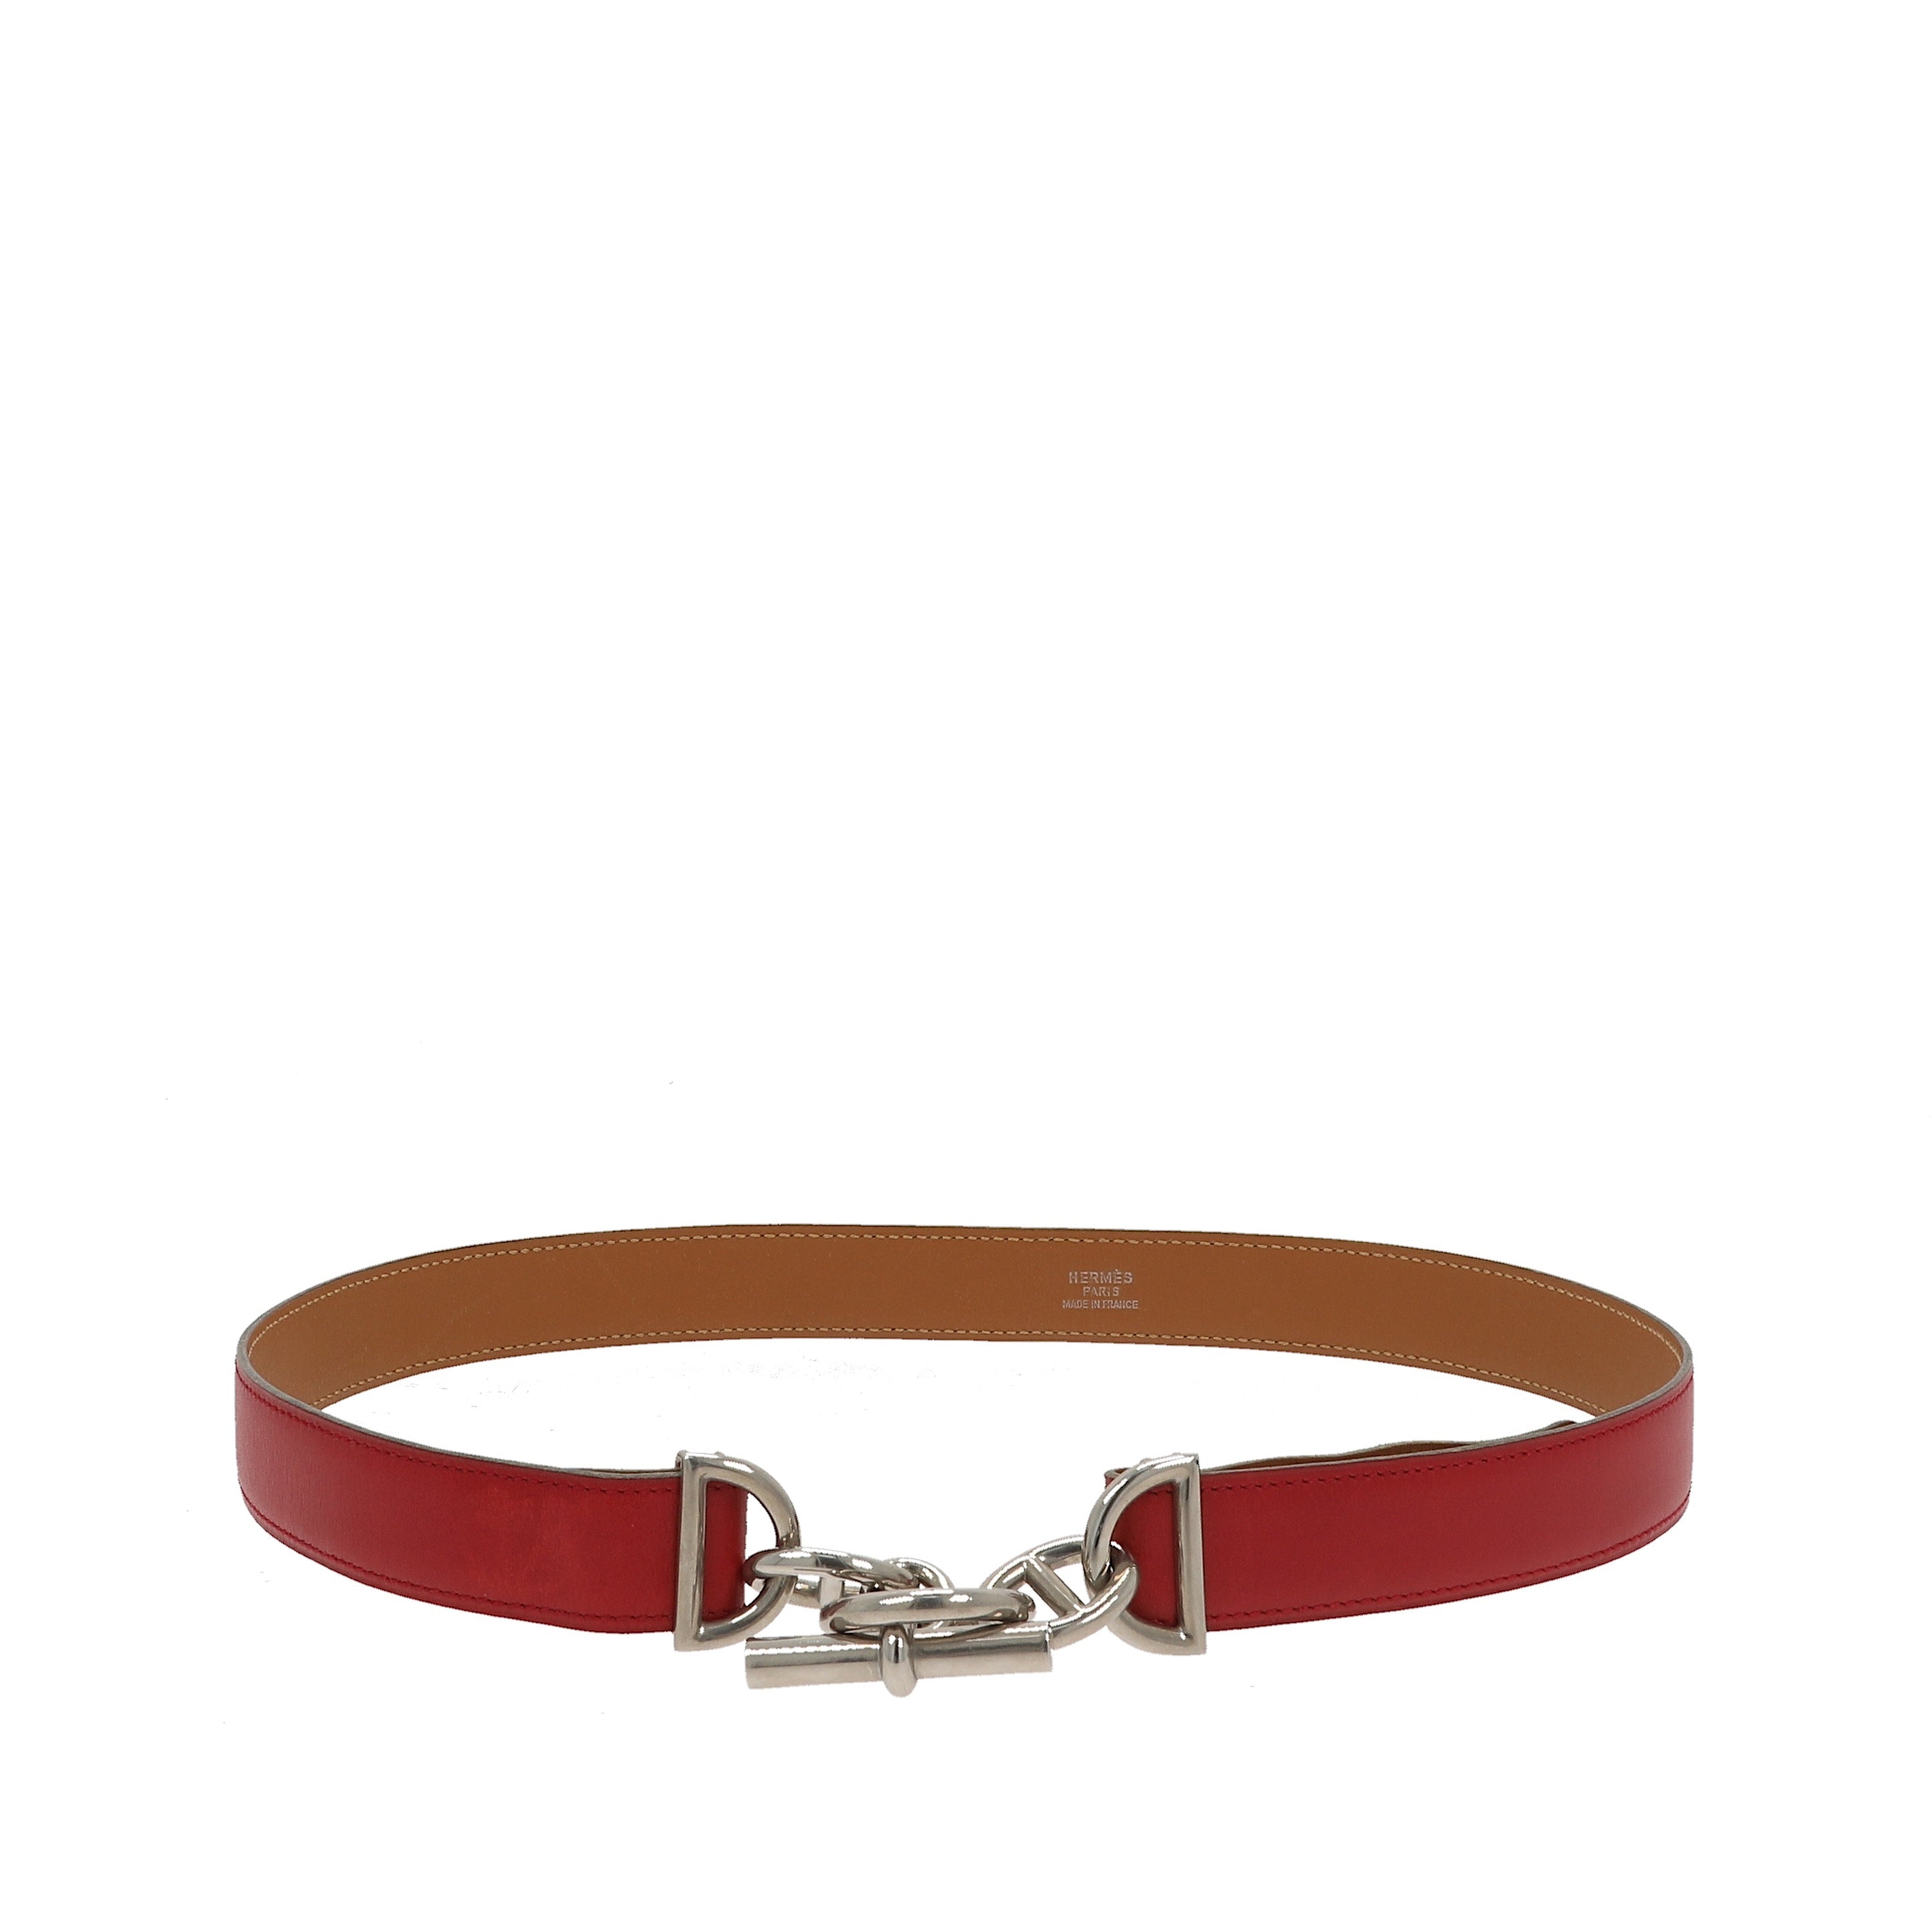 image of HERMES Chaine D'Ancre Belt in Red Leather